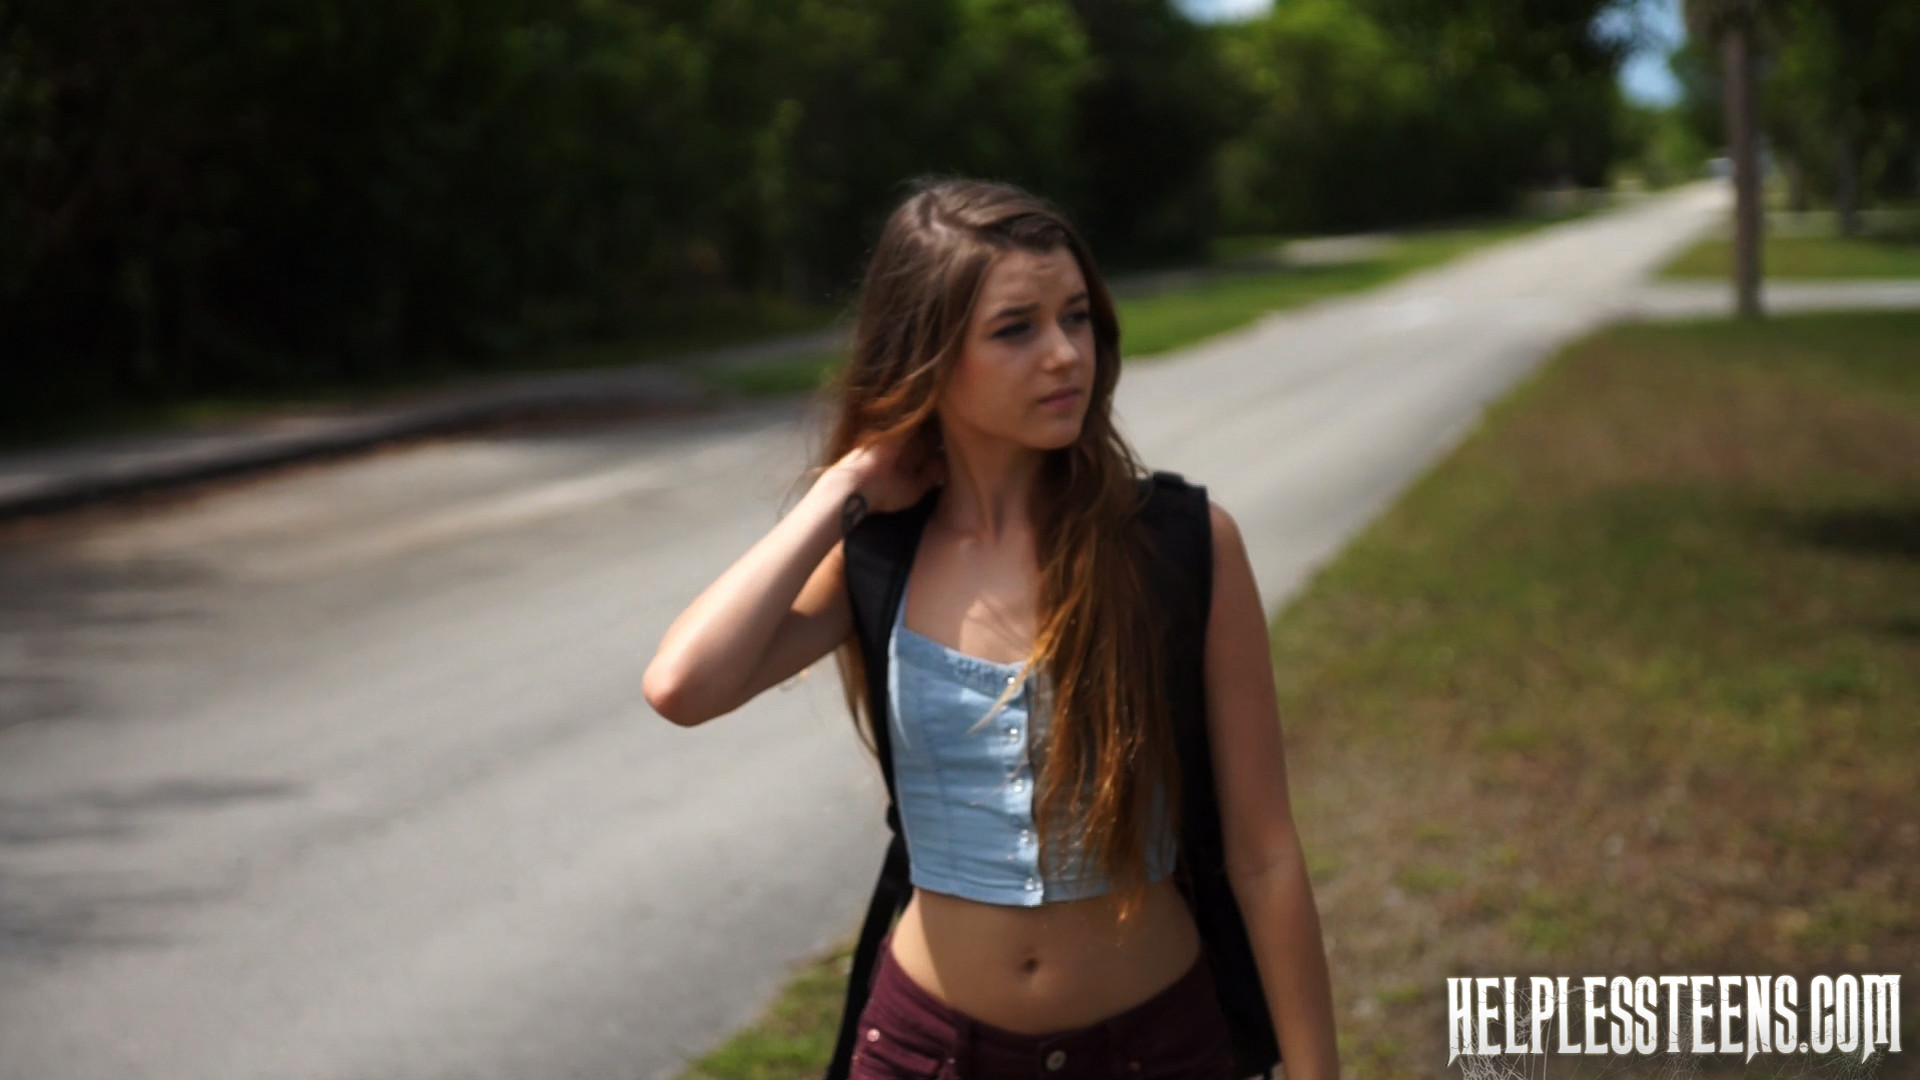 Helpless teen Alex Mae went out for a hike. She took a wrong turn and is now los #71873141